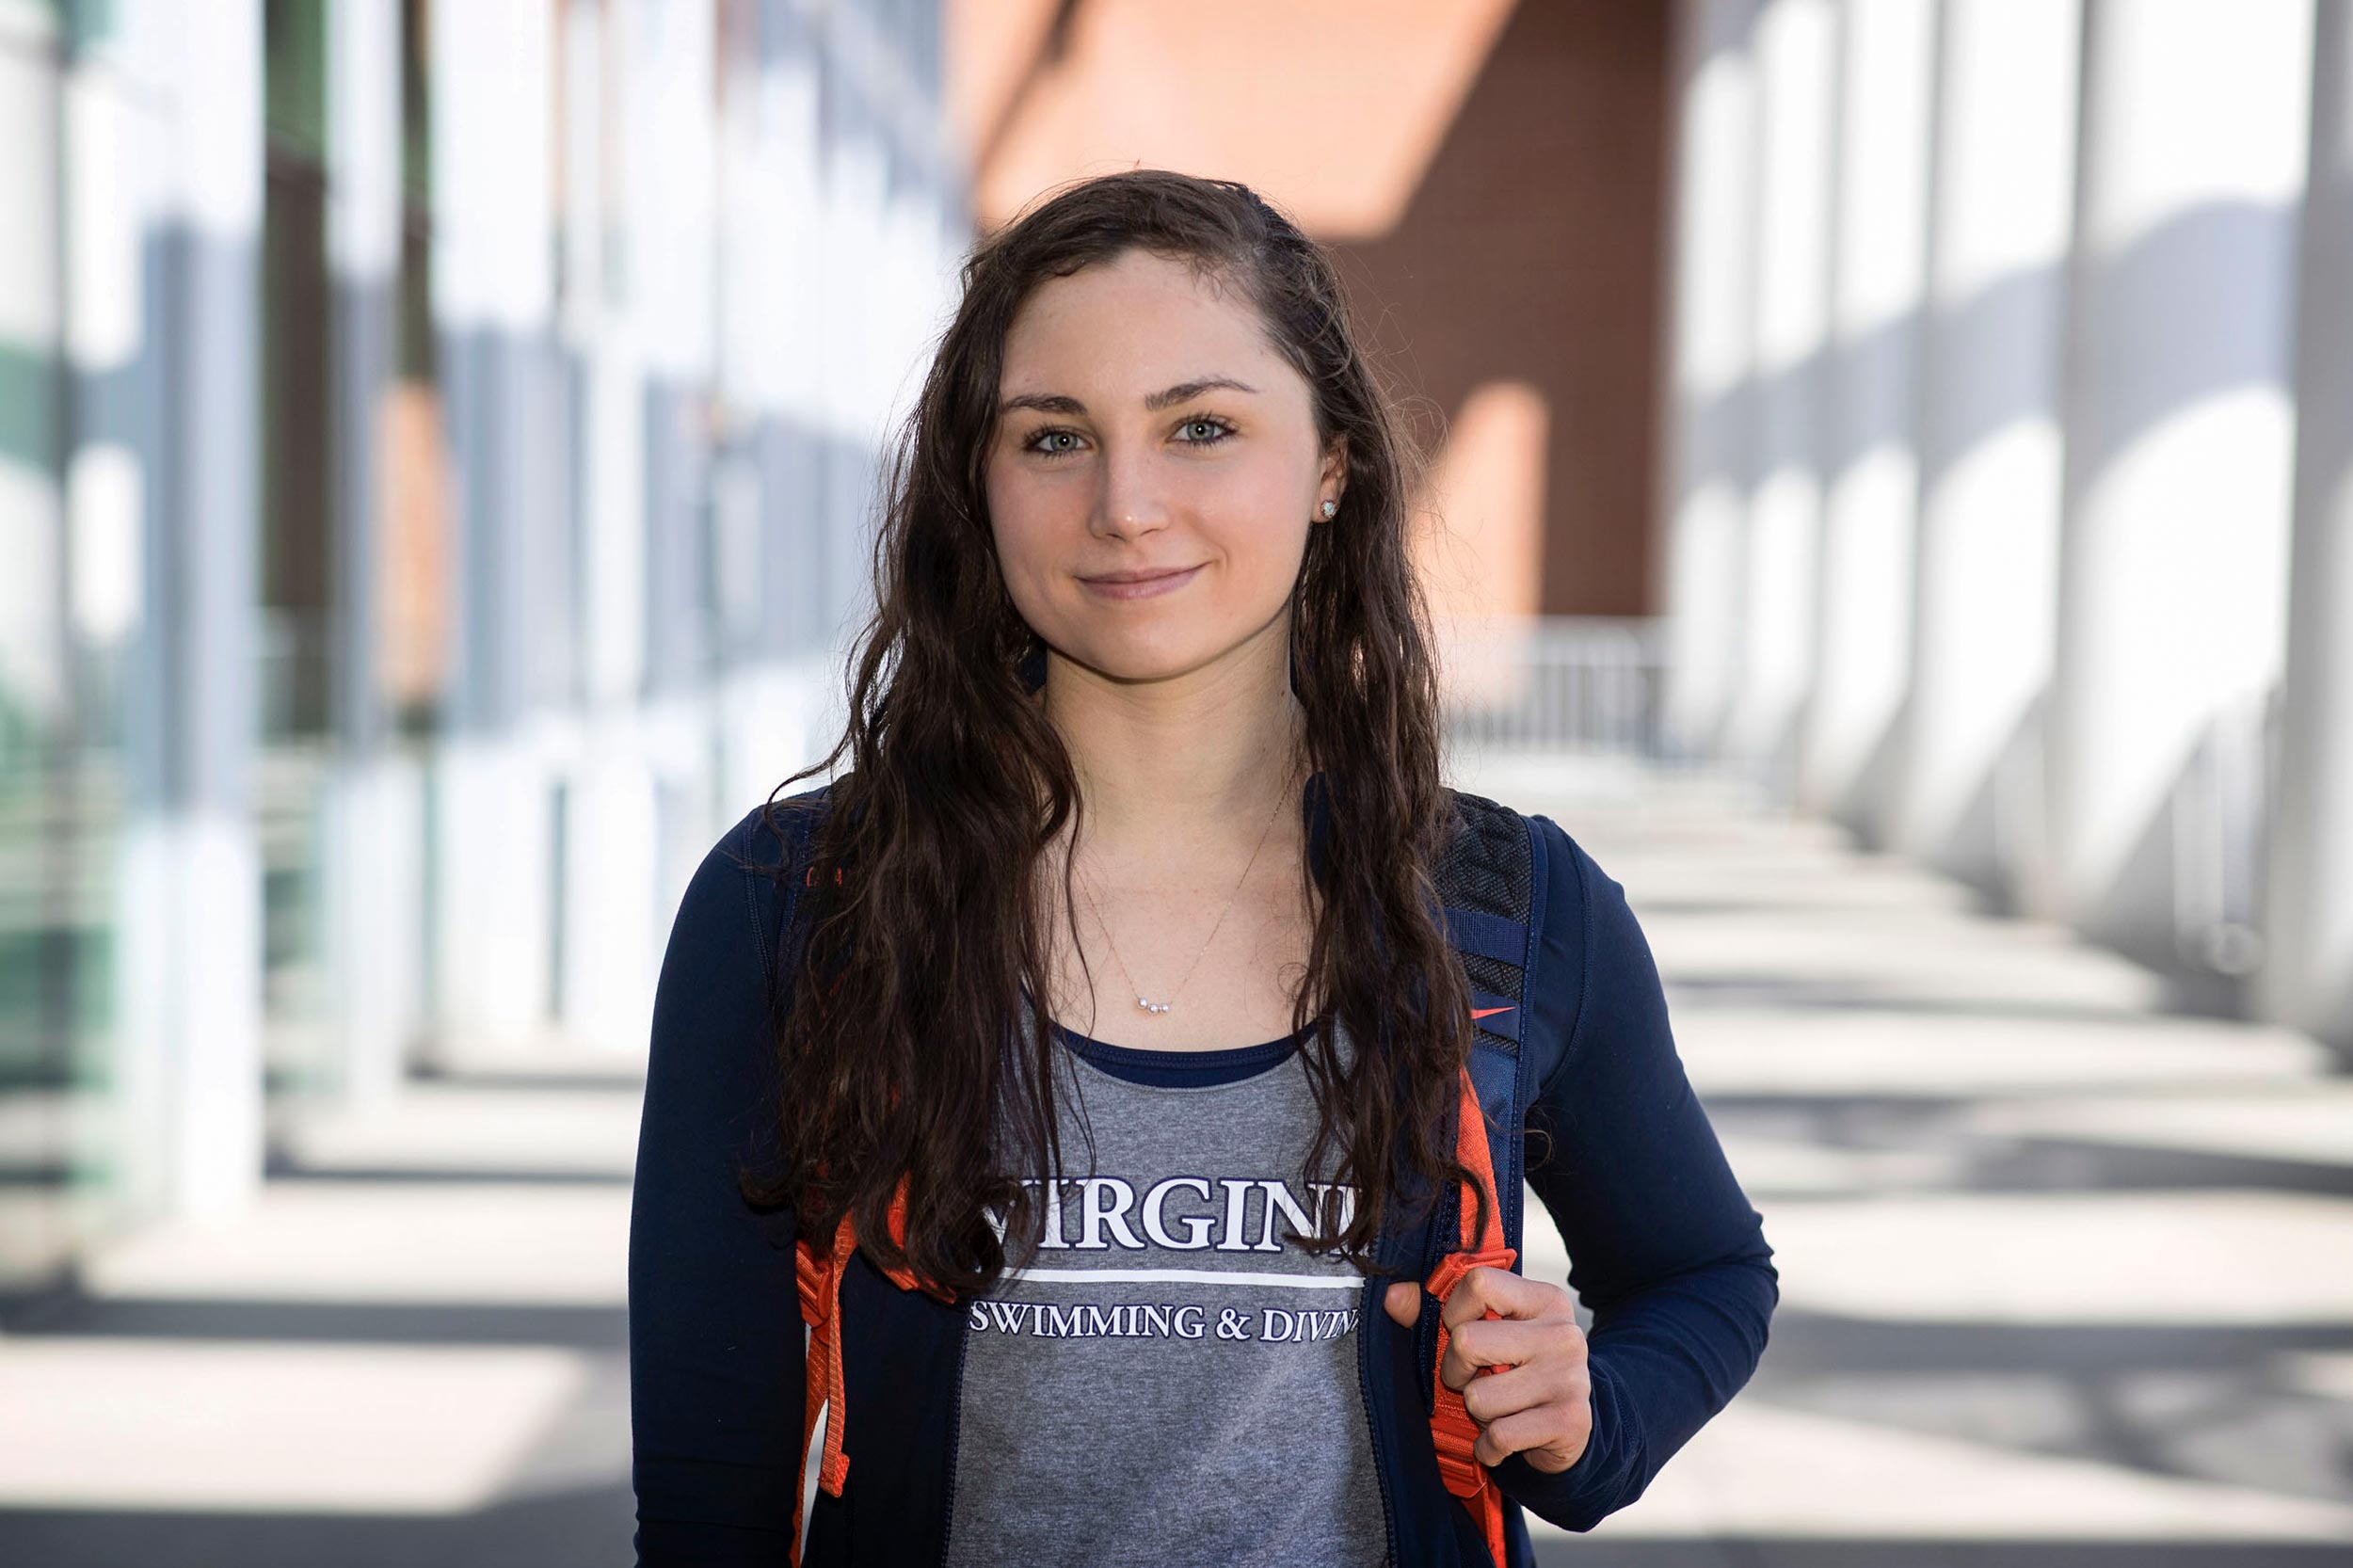 UVA fourth-year student Rachel Politi is the epitome of a student-athlete, according to UVA swimming coach Todd DeSorbo. 